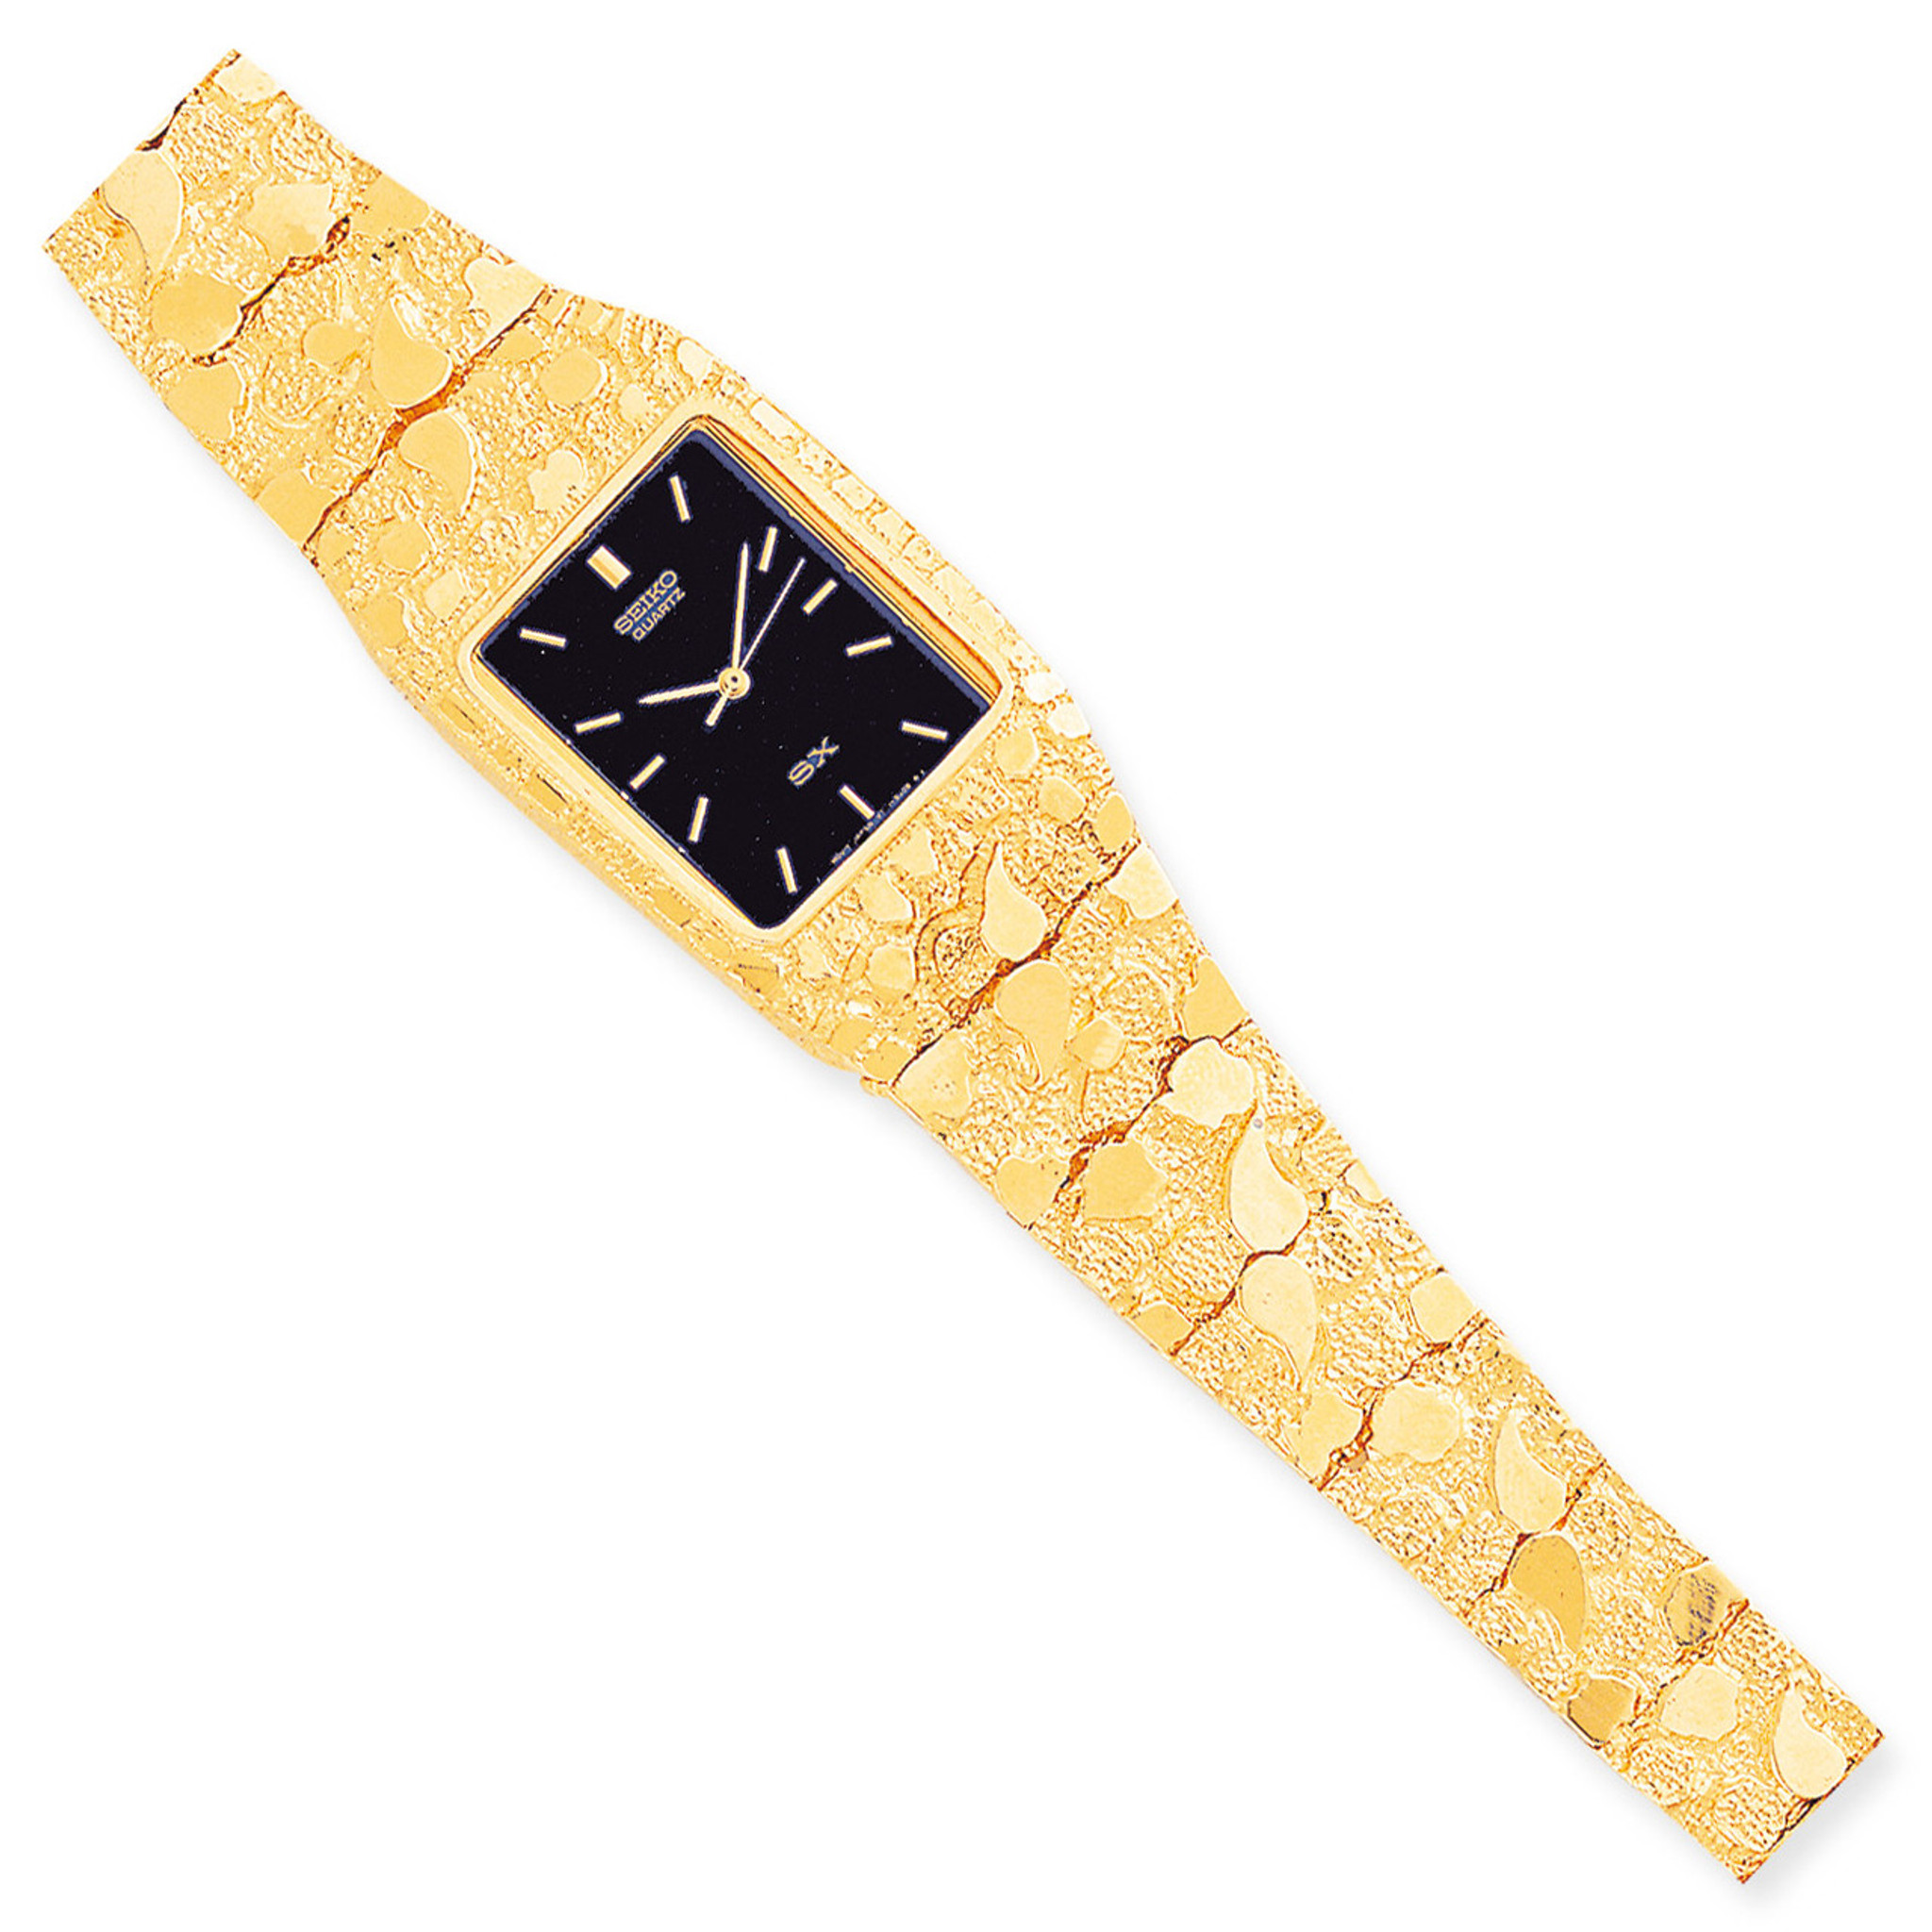 Black 27x47mm Dial Square Face Nugget Watch 10k Gold - HomeBello